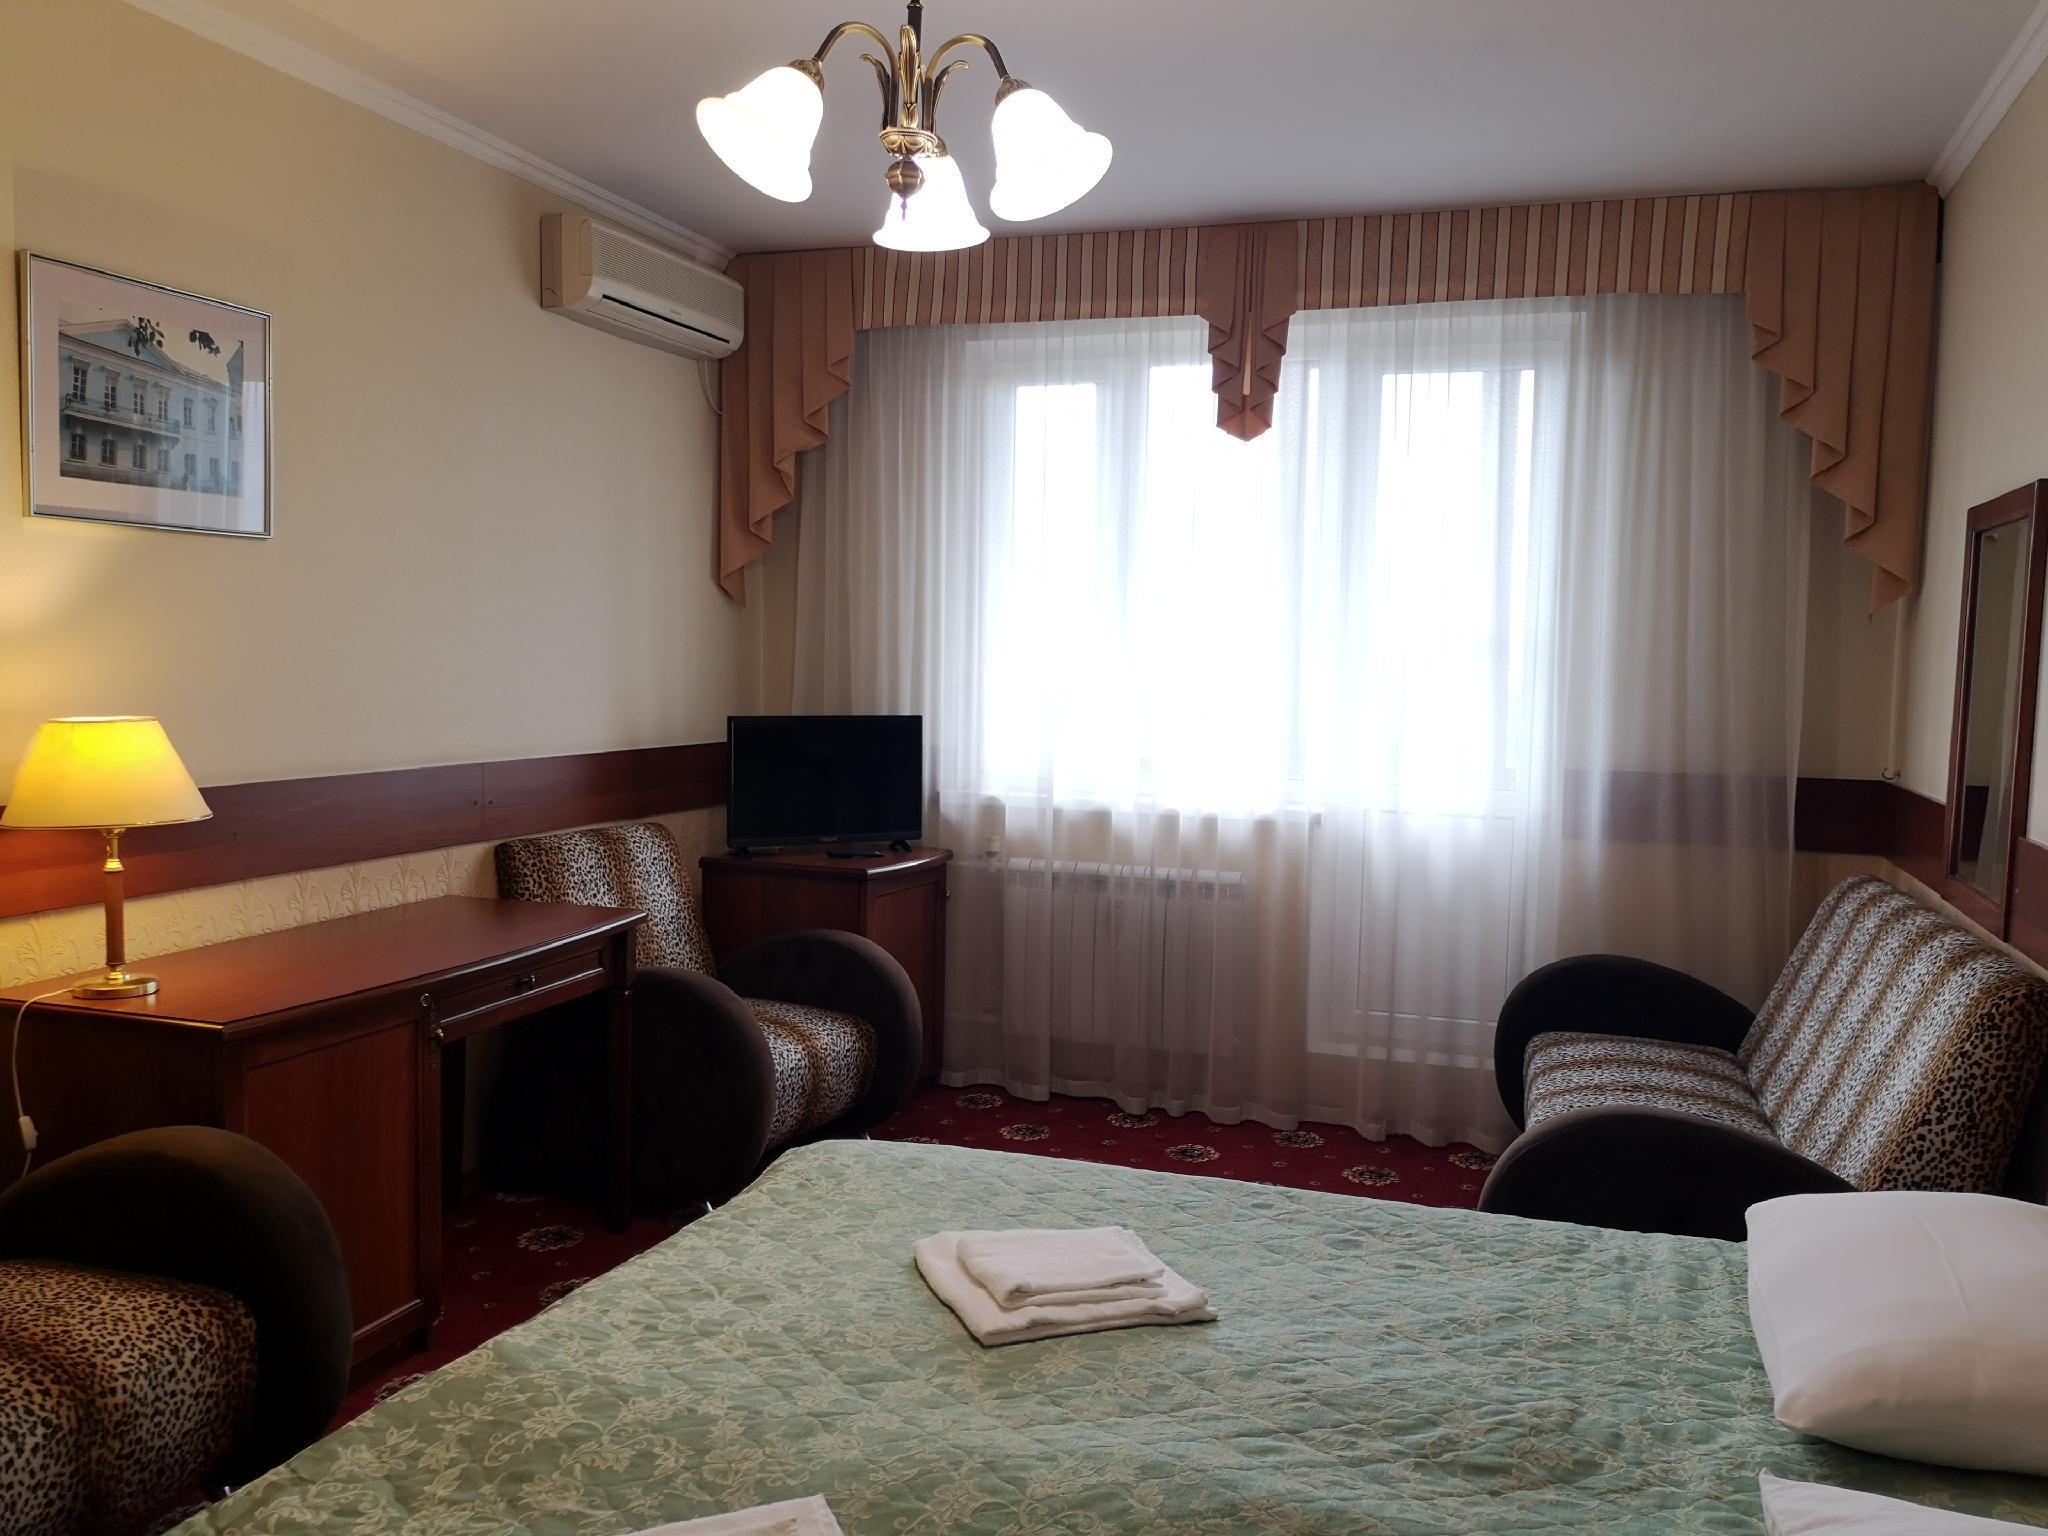 #55 Two Bed Rooms Apartments Park View - Moscow